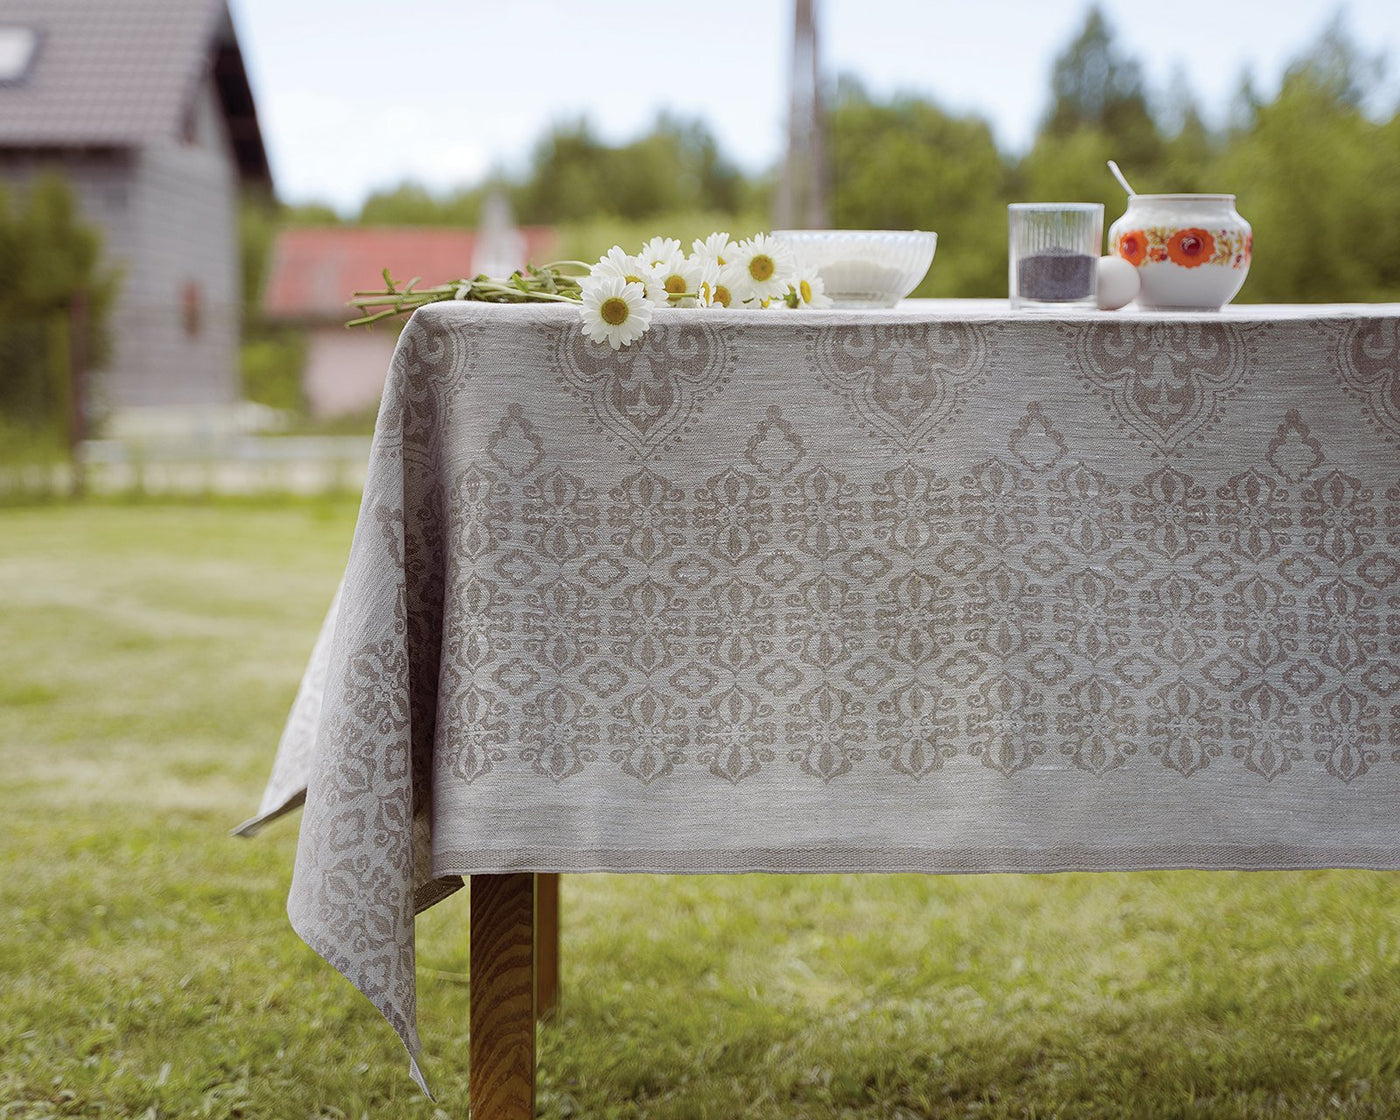 Linen tablecloth with a traditional pattern